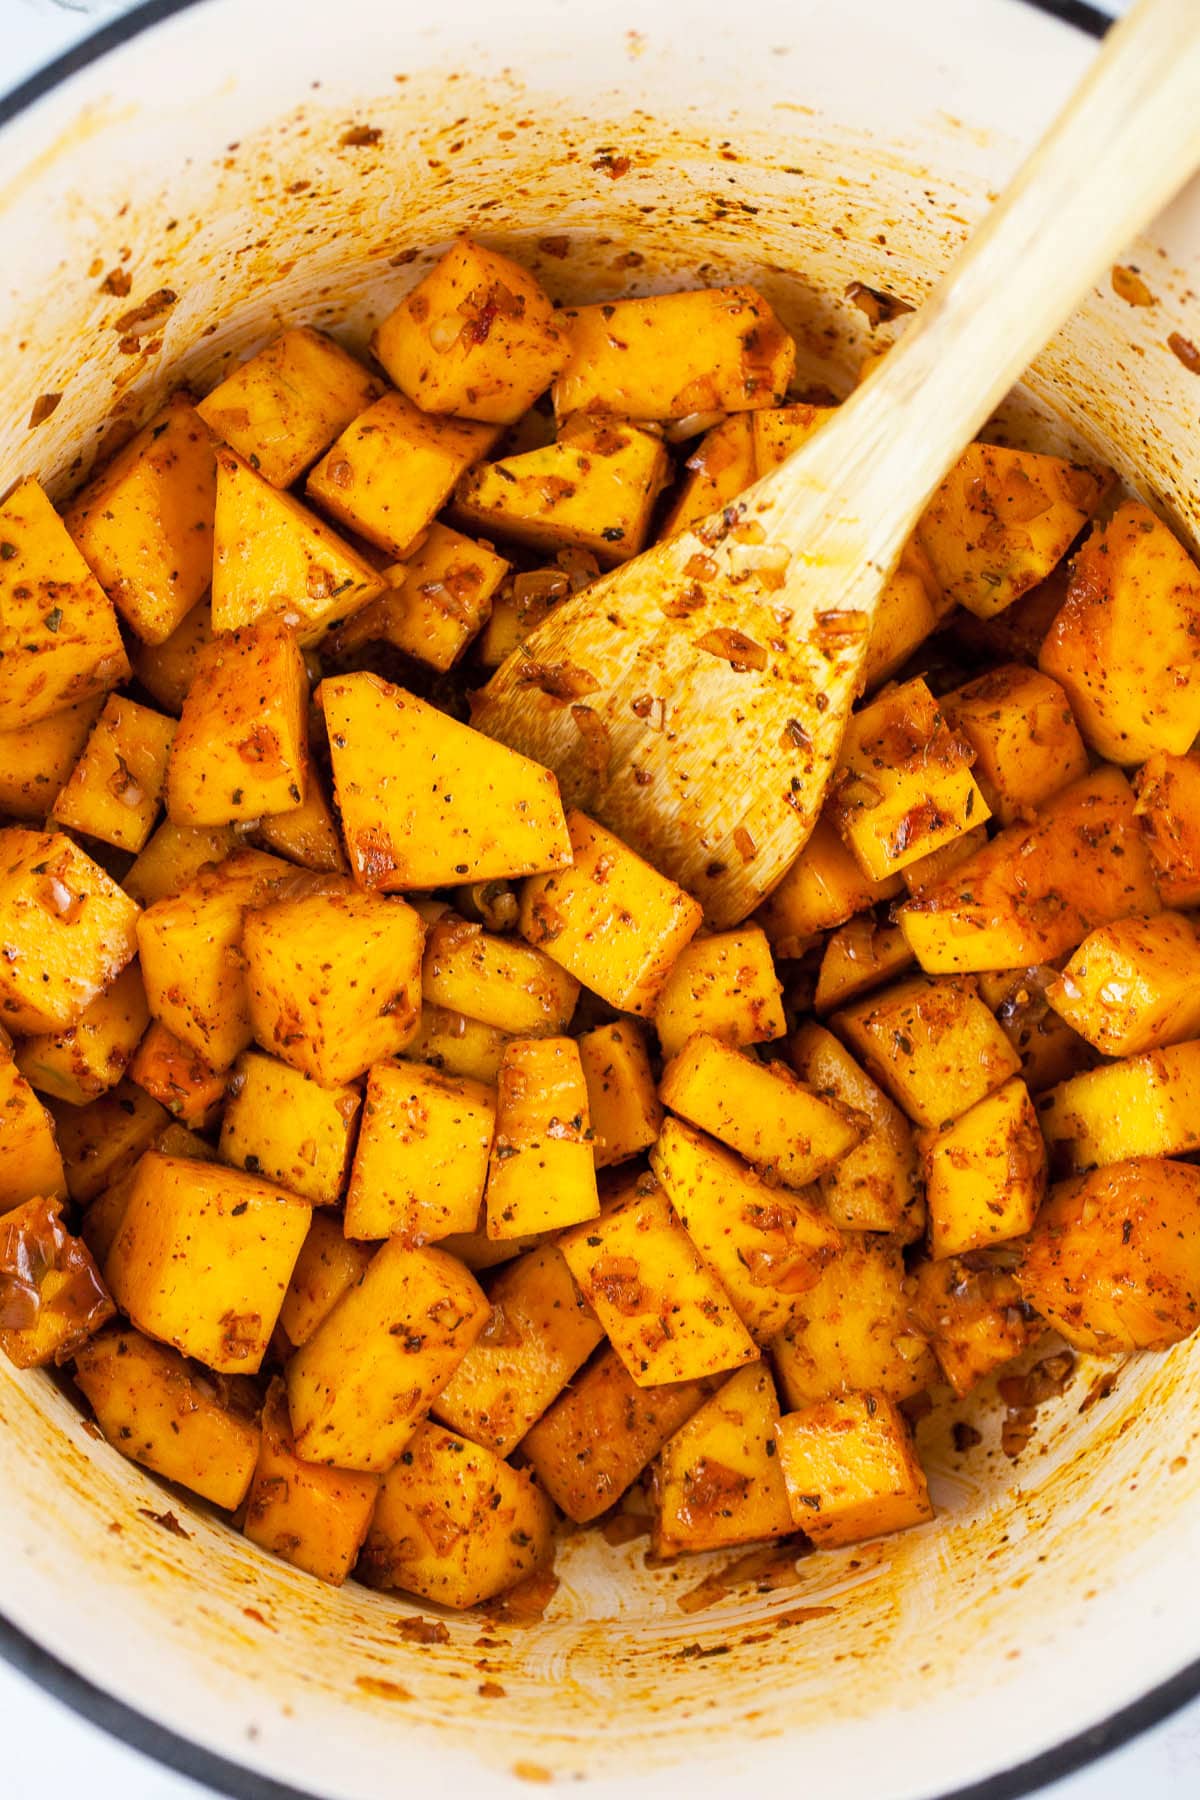 Butternut squash chunks sautéed in Dutch oven with spices.